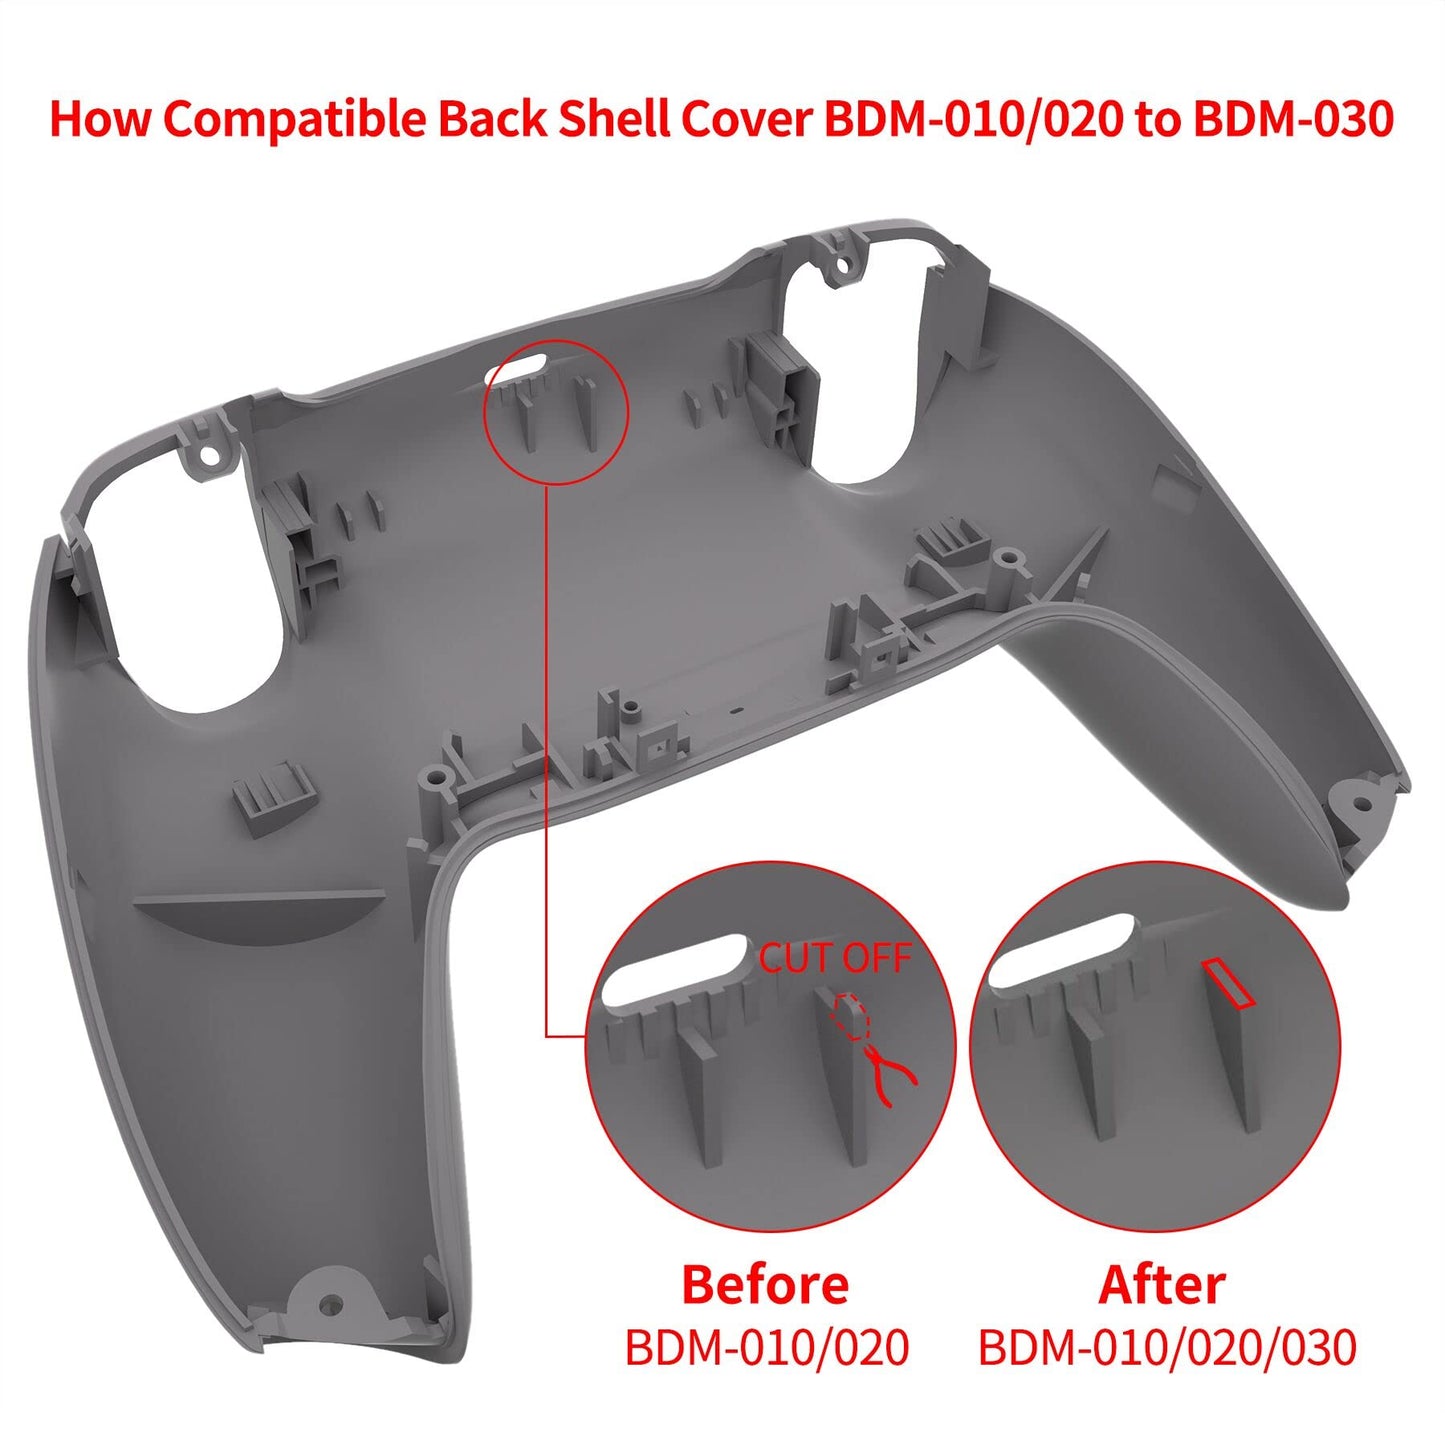 eXtremeRate Black Performance Rubberized Grip Custom Back Housing Bottom Shell Compatible with ps5 Controller, Replacement Back Shell Cover Compatible with ps5 Controller - amzGamess